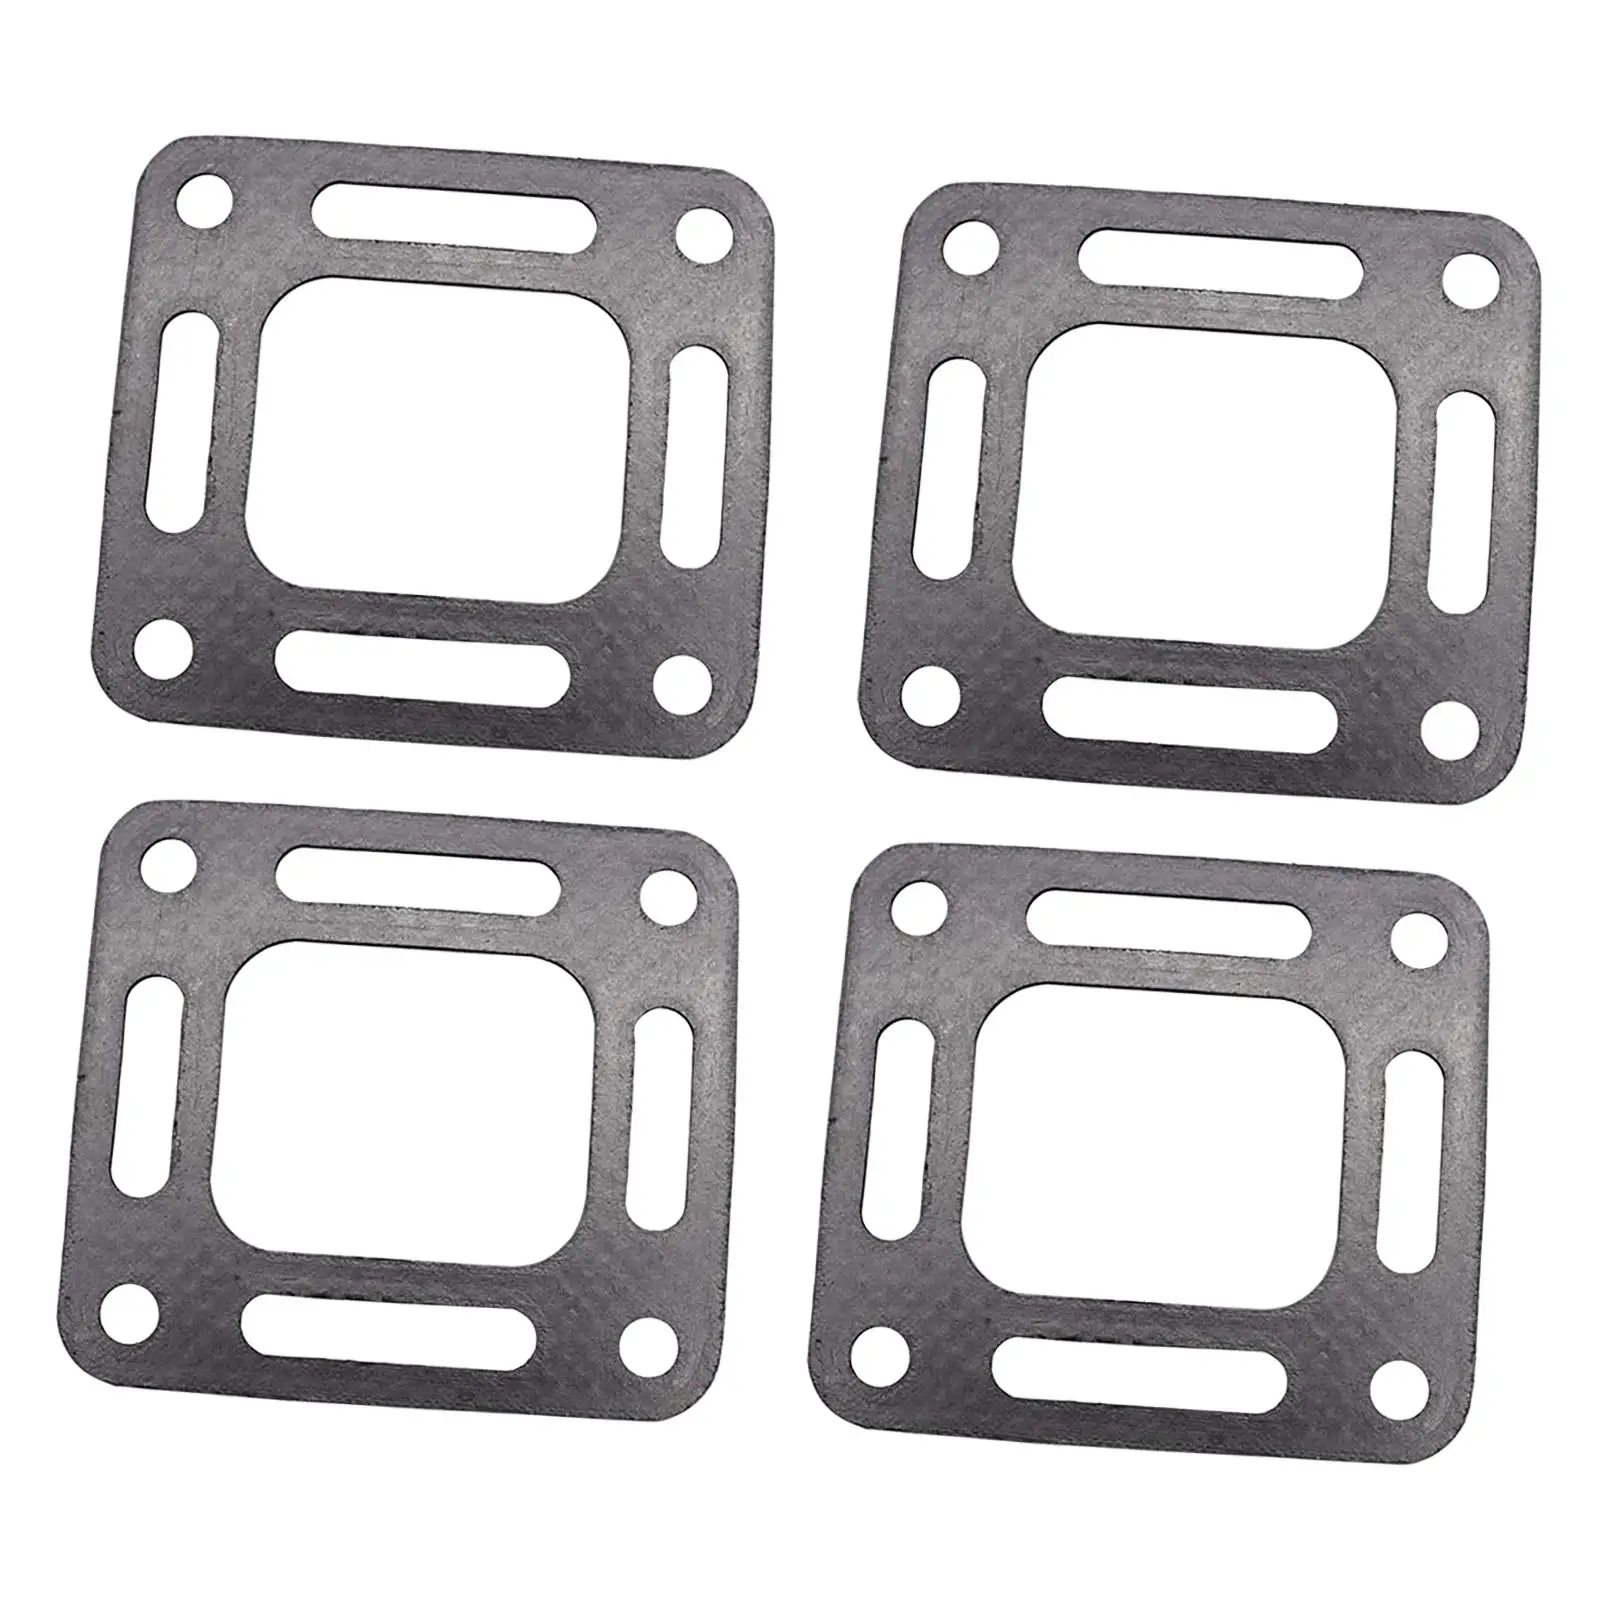 18-2849-1 High Performance Replaces Durable Spare Parts Exhaust Elbow Gasket 27-818832 27-863726 for Mercury Outboard Motor